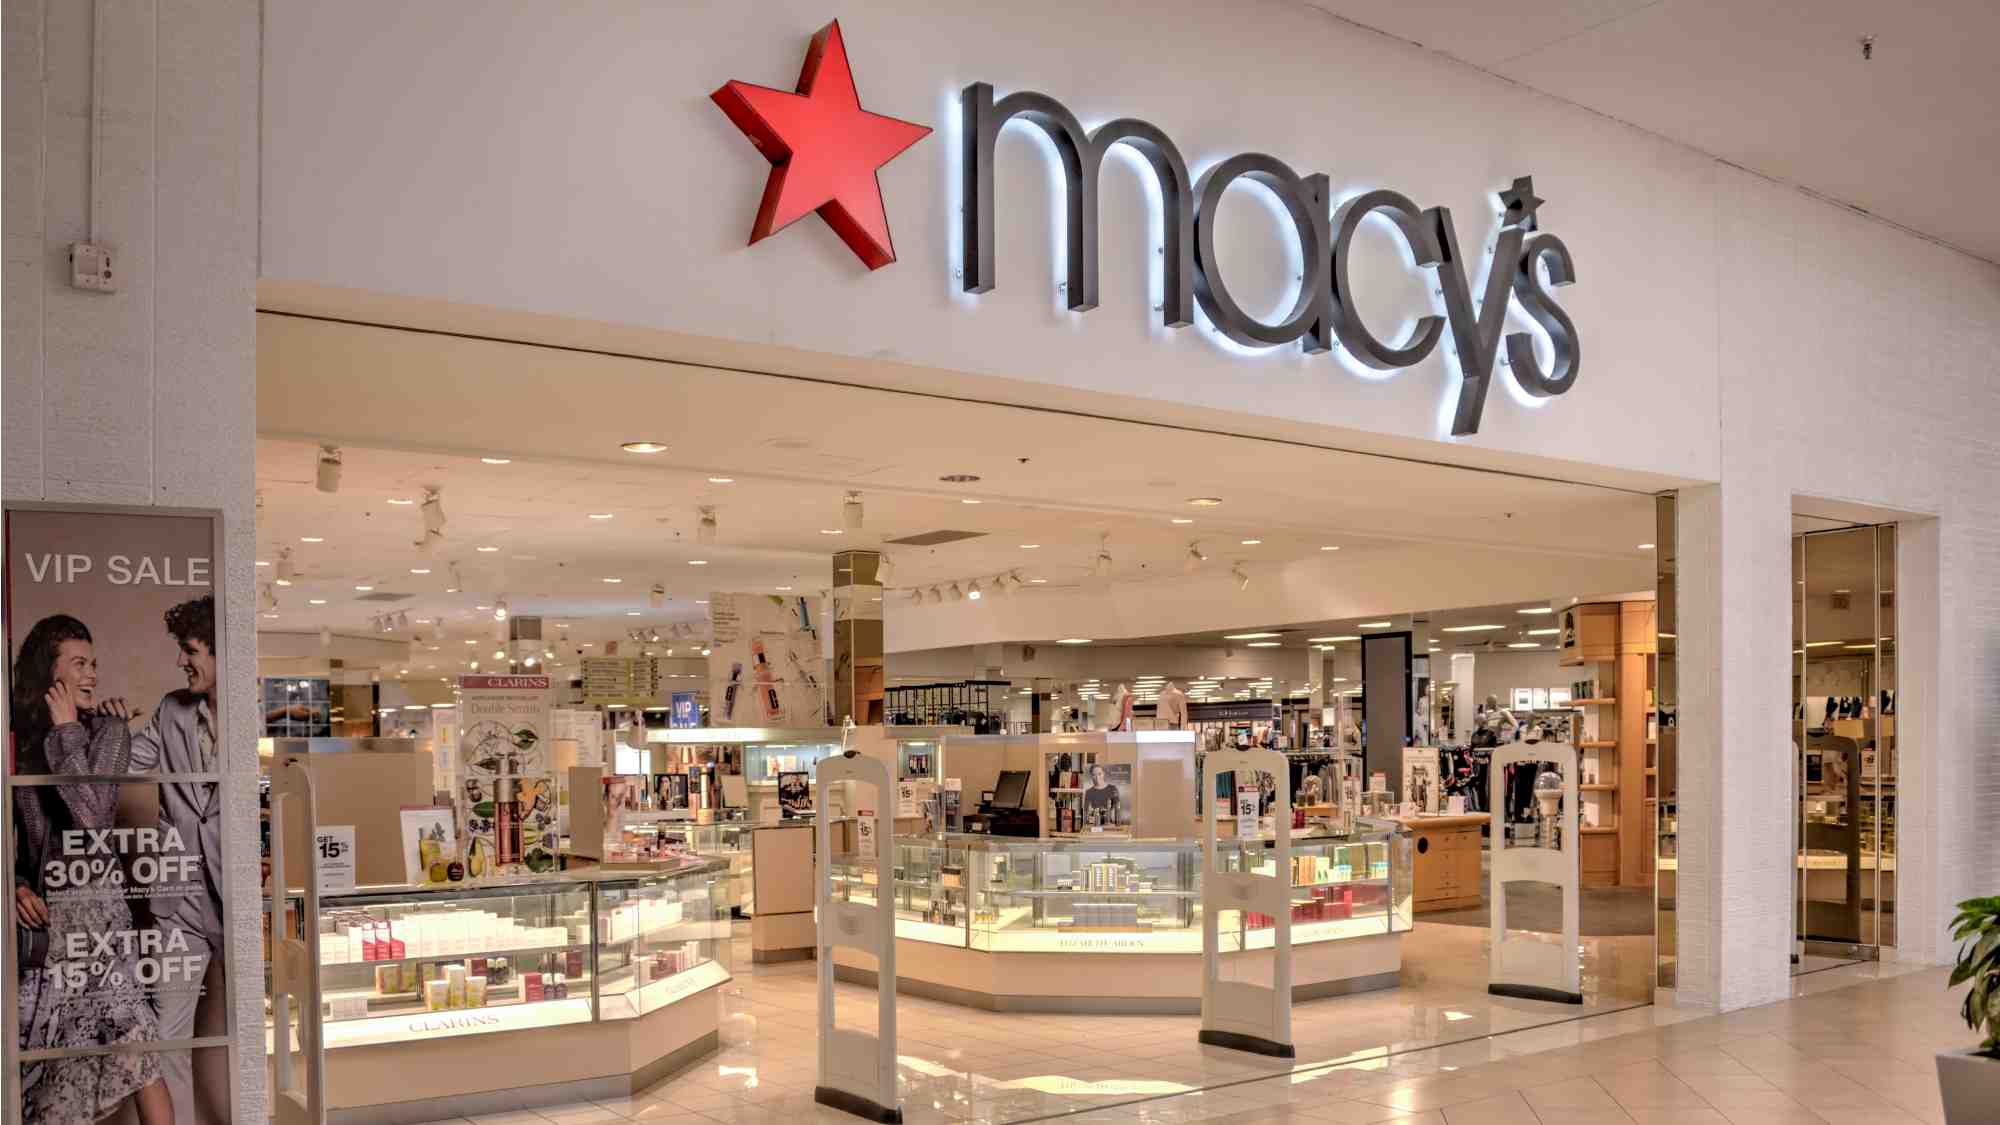 Caught in a retail limbo? Discover why "A Bold New Chapter" isn’t an adieu but a thrilling twist in the Macy's shutdown saga. It's corporate survival of the swankiest!